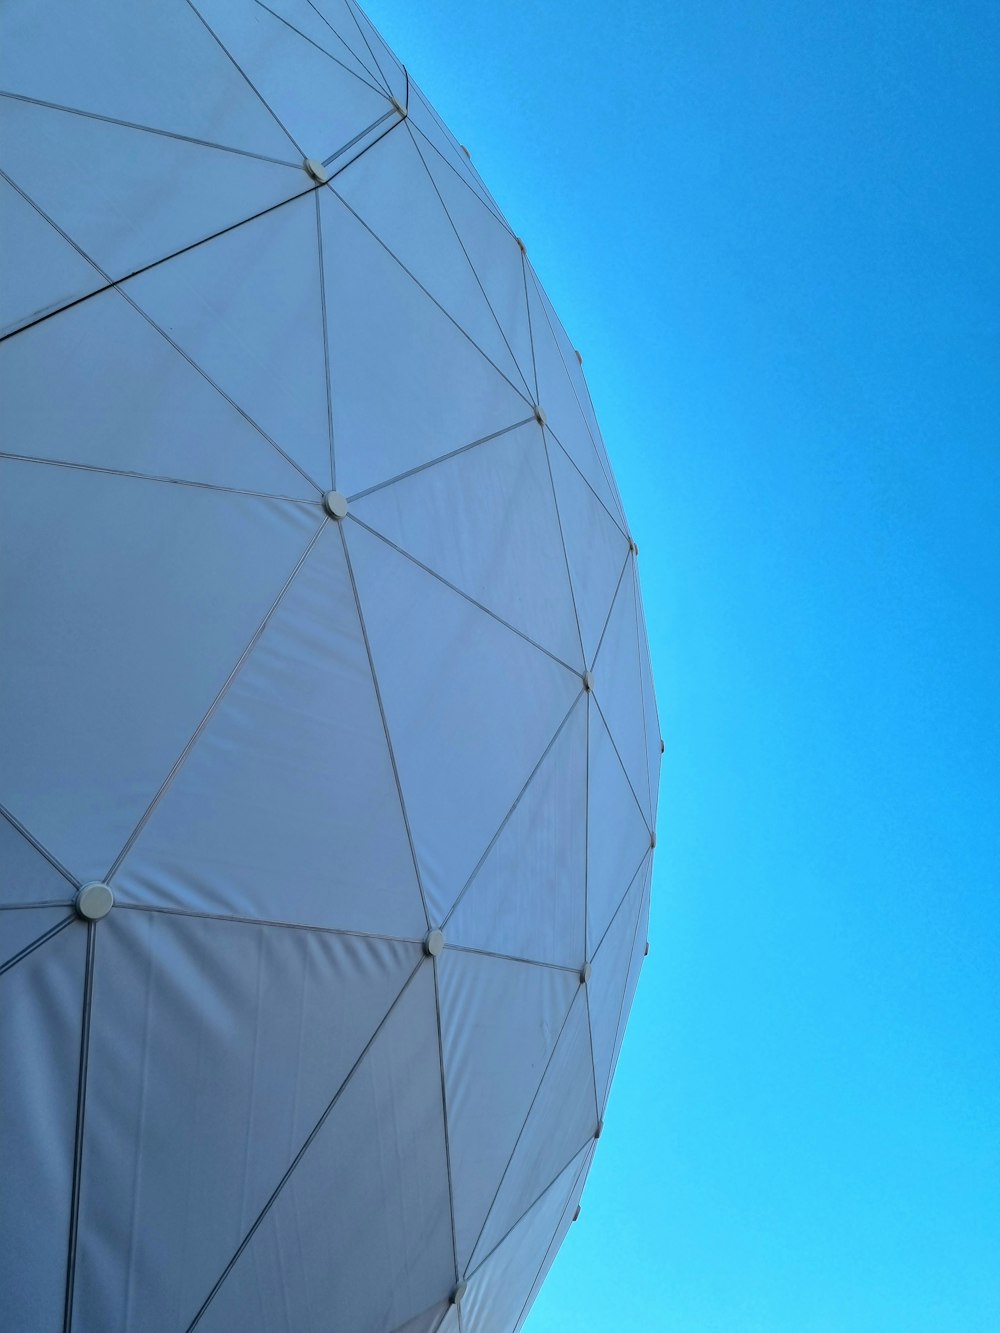 a large white object with a blue sky in the background